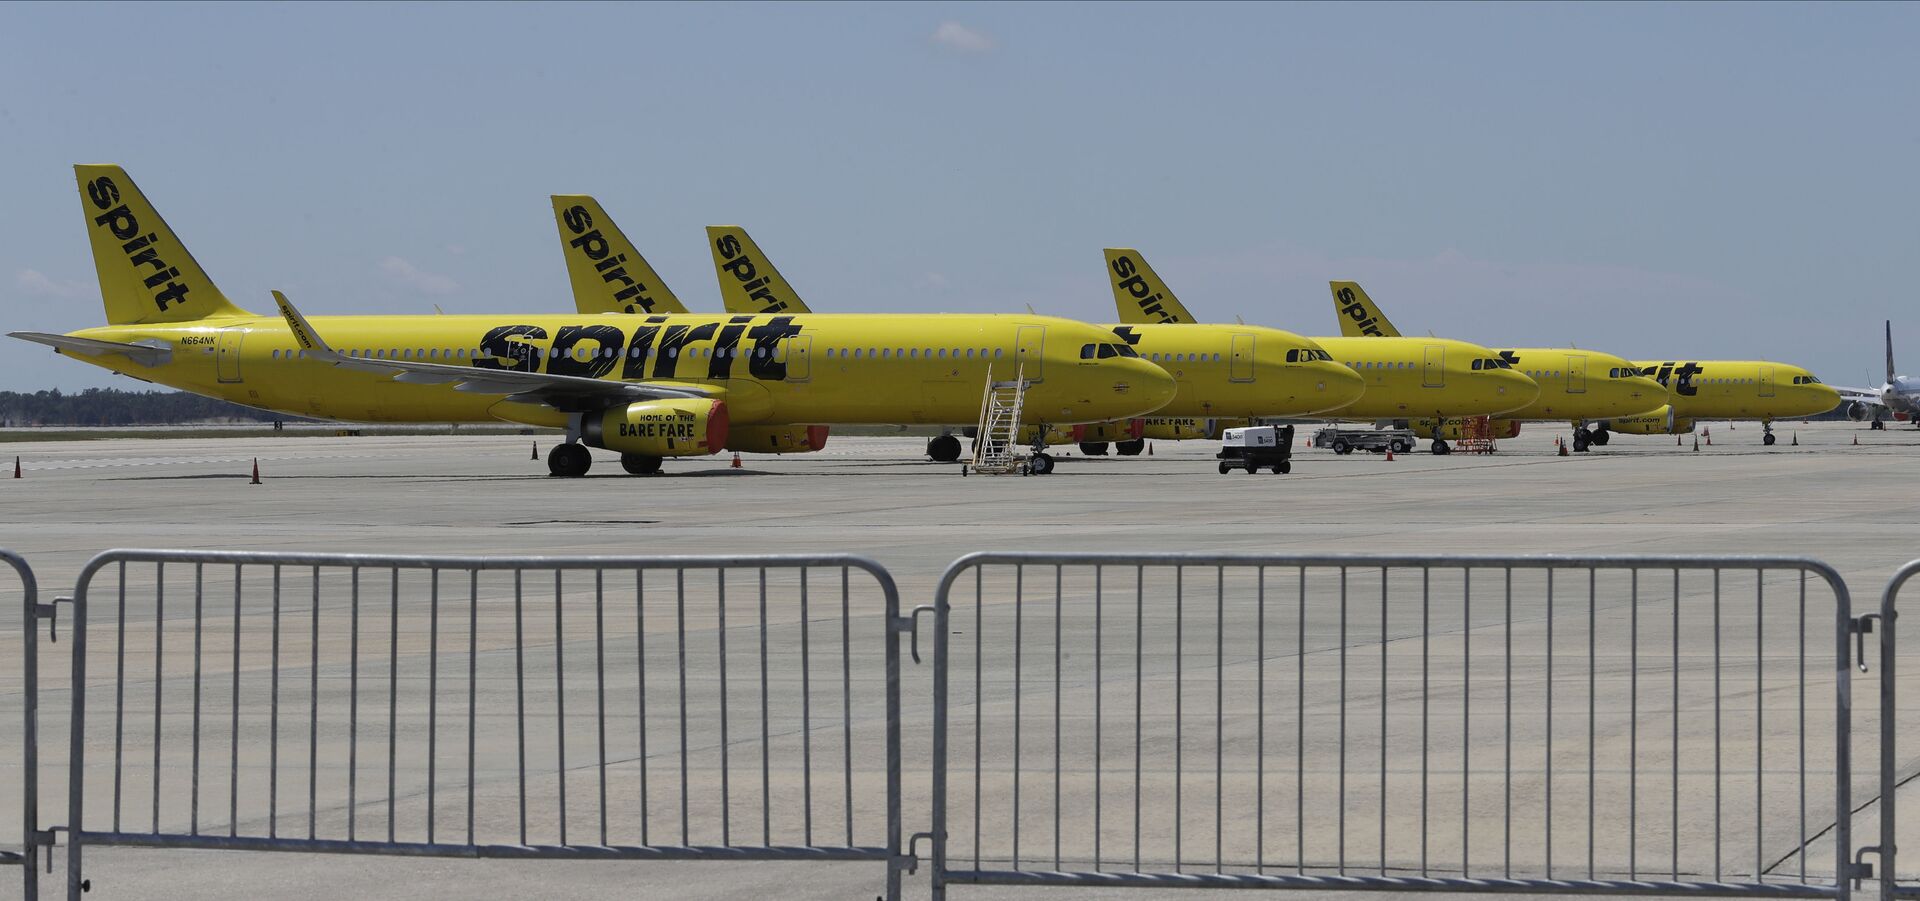 A line of Spirit Airlines jets sit on the tarmac at the Orlando International Airport Wednesday, May 20, 2020, in Orlando, Fla. Air travel is down during the coronavirus outbreak. - Sputnik International, 1920, 07.09.2021